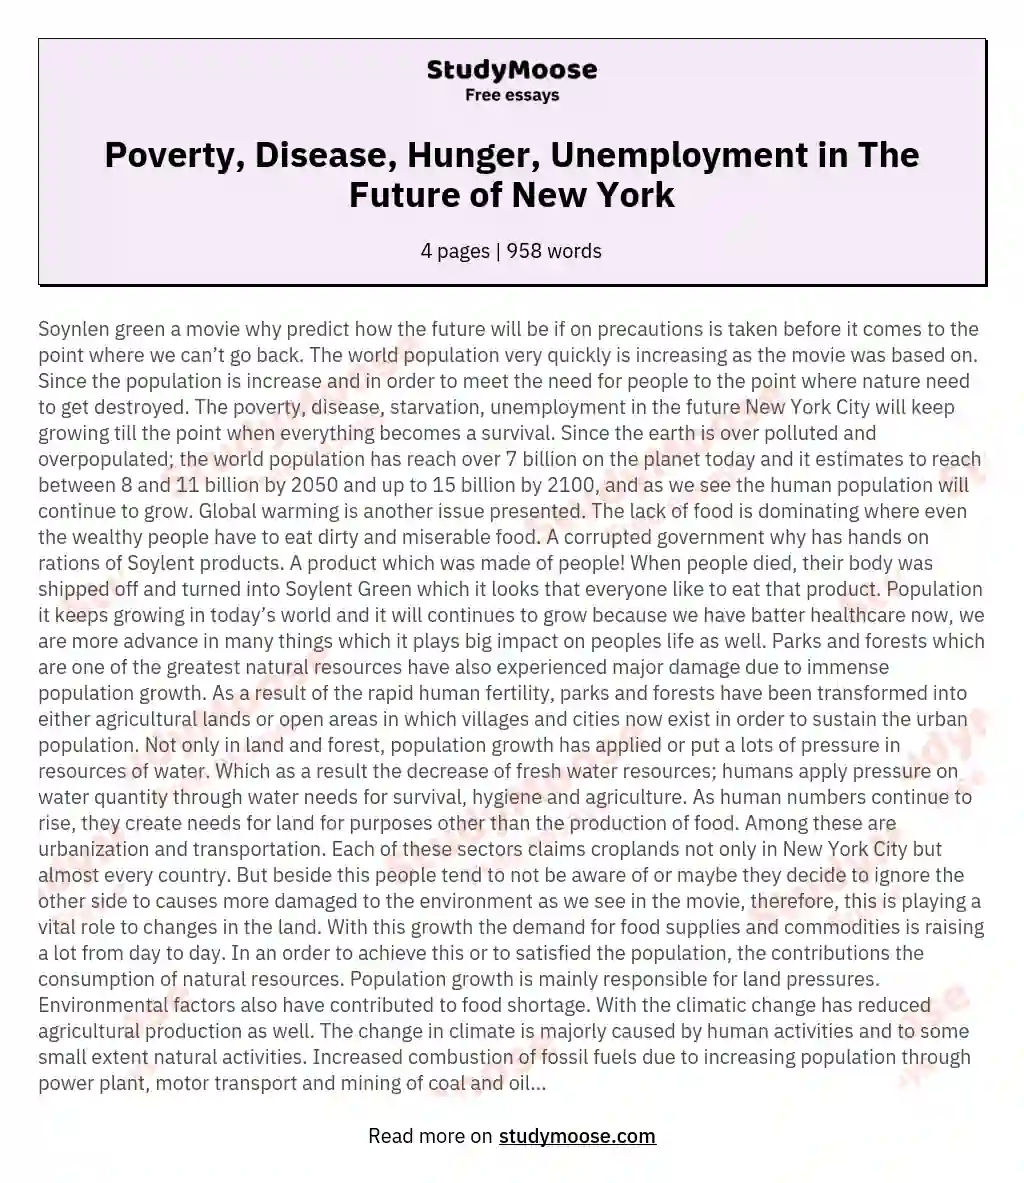 Poverty, Disease, Hunger, Unemployment in The Future of New York essay